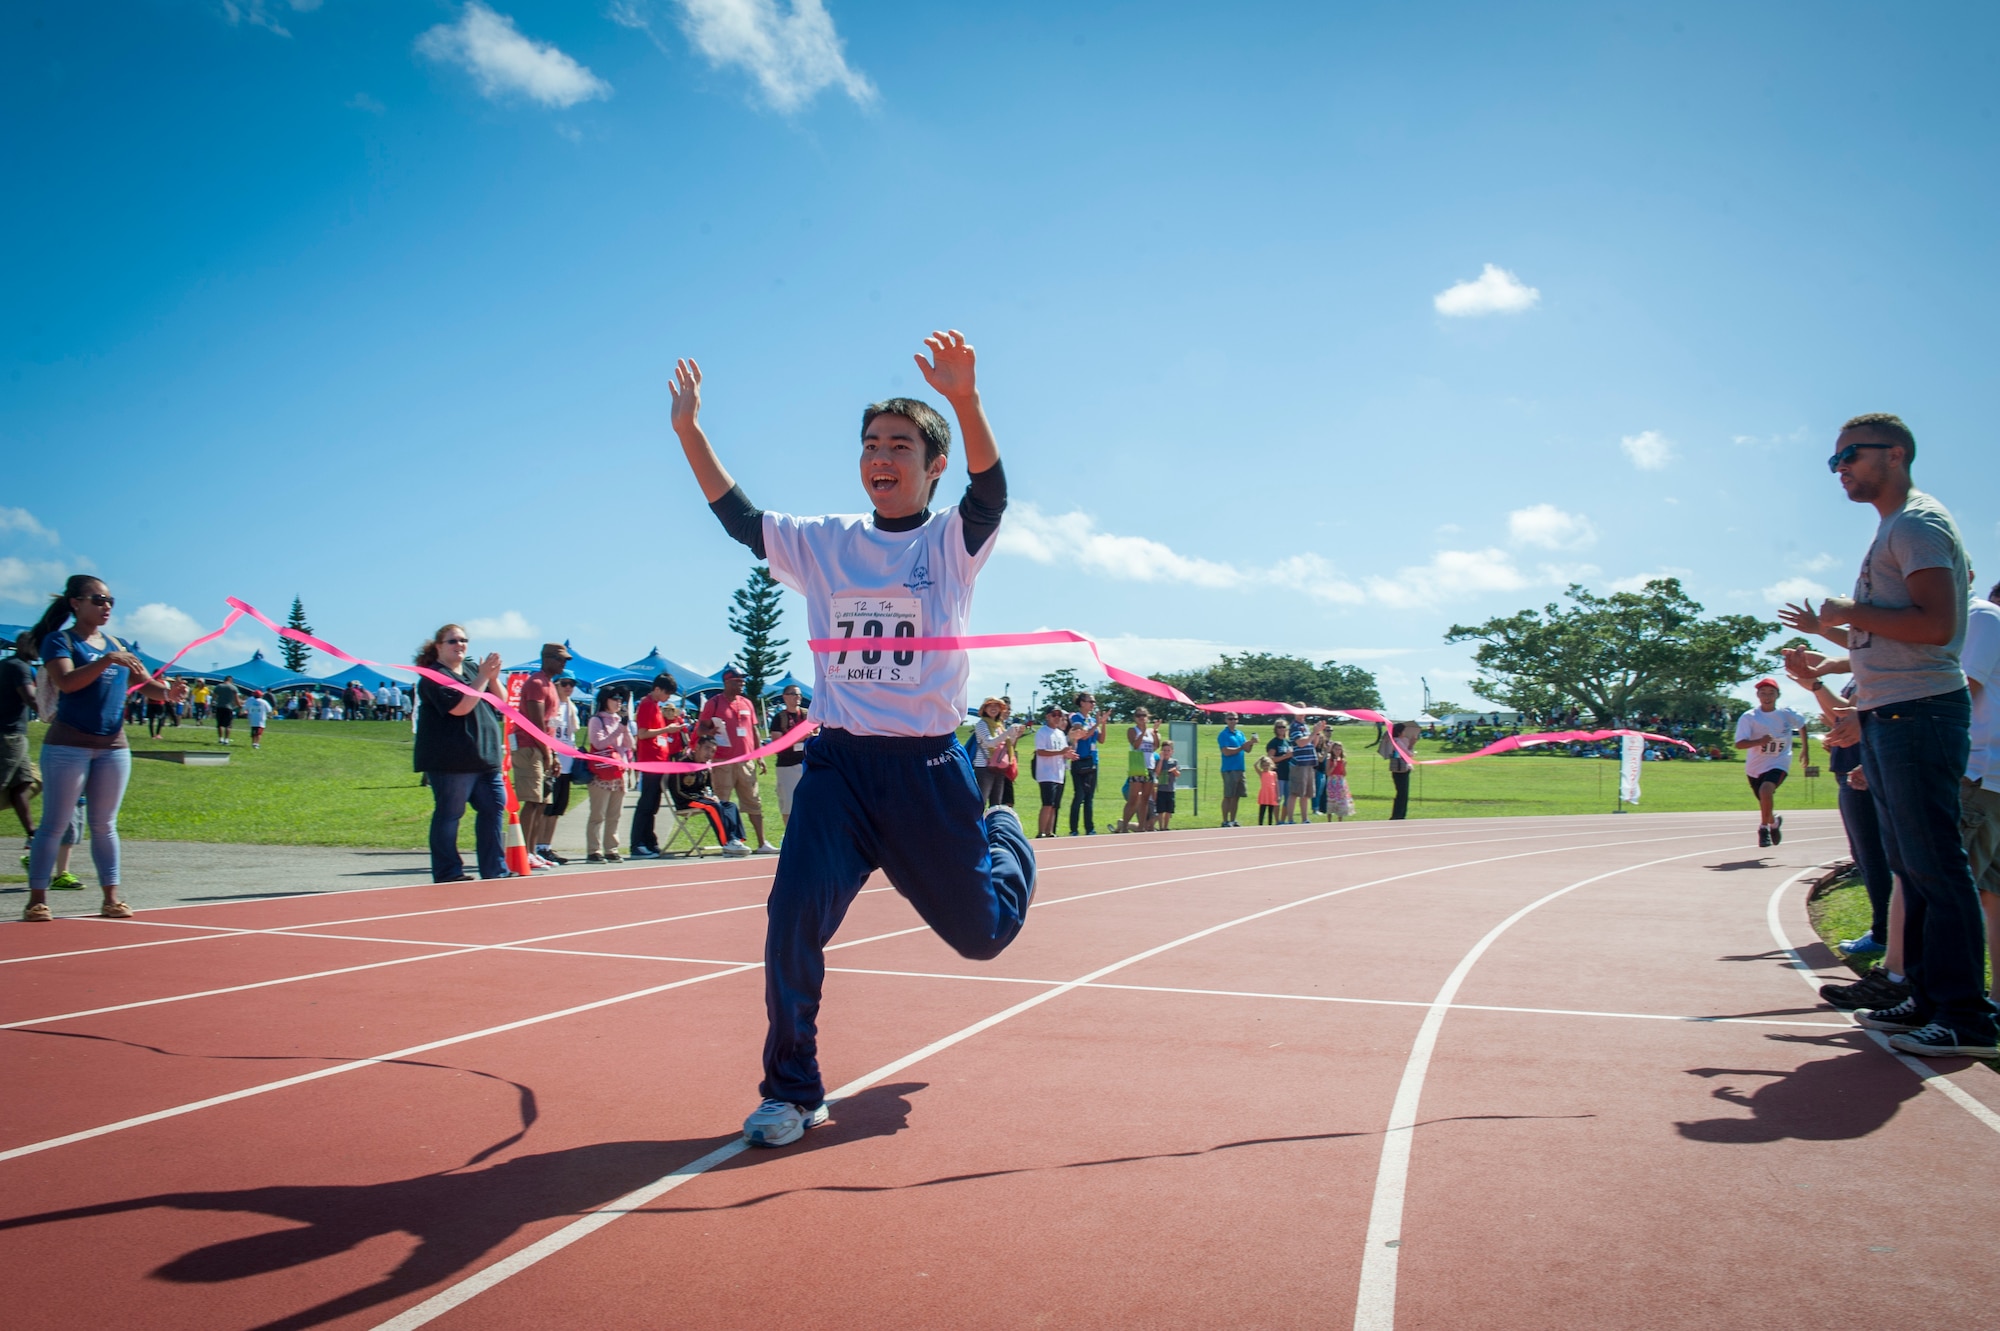 Kohei Setake, a Kadena Special Olympics athlete, wins first place in a 200 meter dash during the Kadena Special Olympics Nov. 7, 2015, at Kadena Air Base, Japan. Established by the 18th Wing commander in 2000, KSO is a sporting and entertainment event that provides an opportunity for all communities involved to stand together in support of people with special needs. (U.S. Air Force photo by Airman 1st Class Lynette M. Rolen)